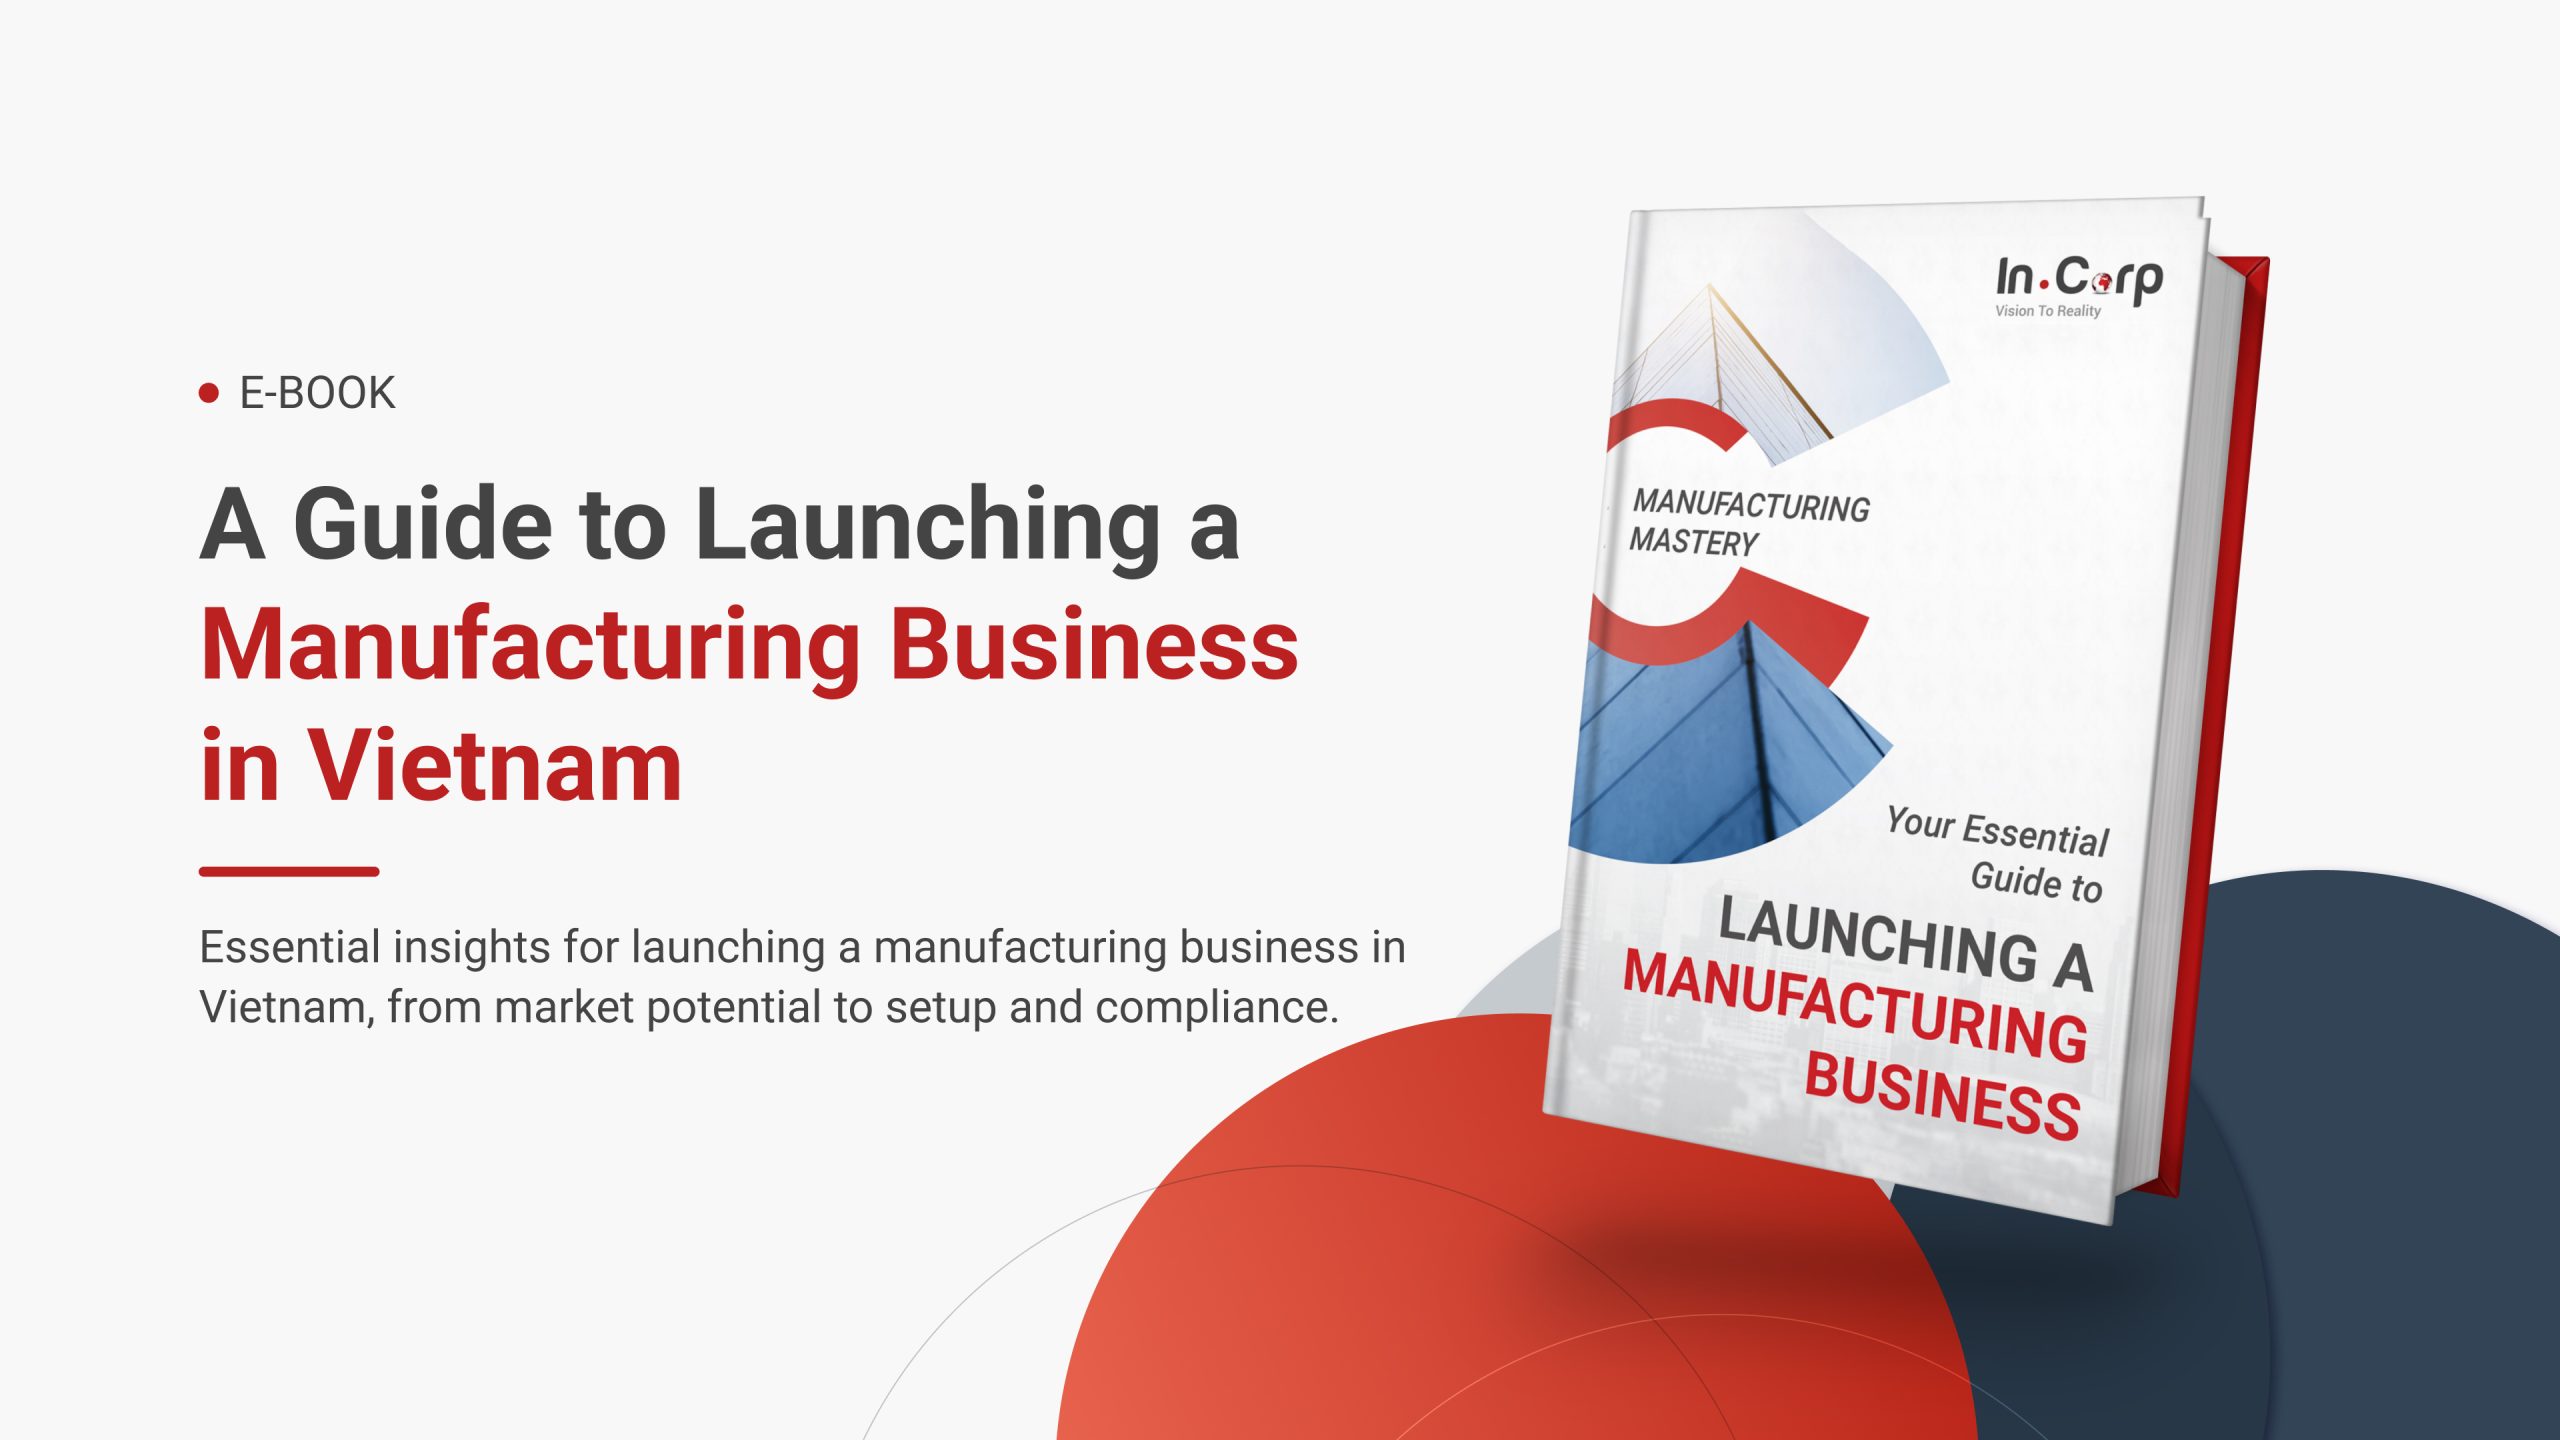 A Guide to Launching a Manufacturing Business in Vietnam for Foreigners